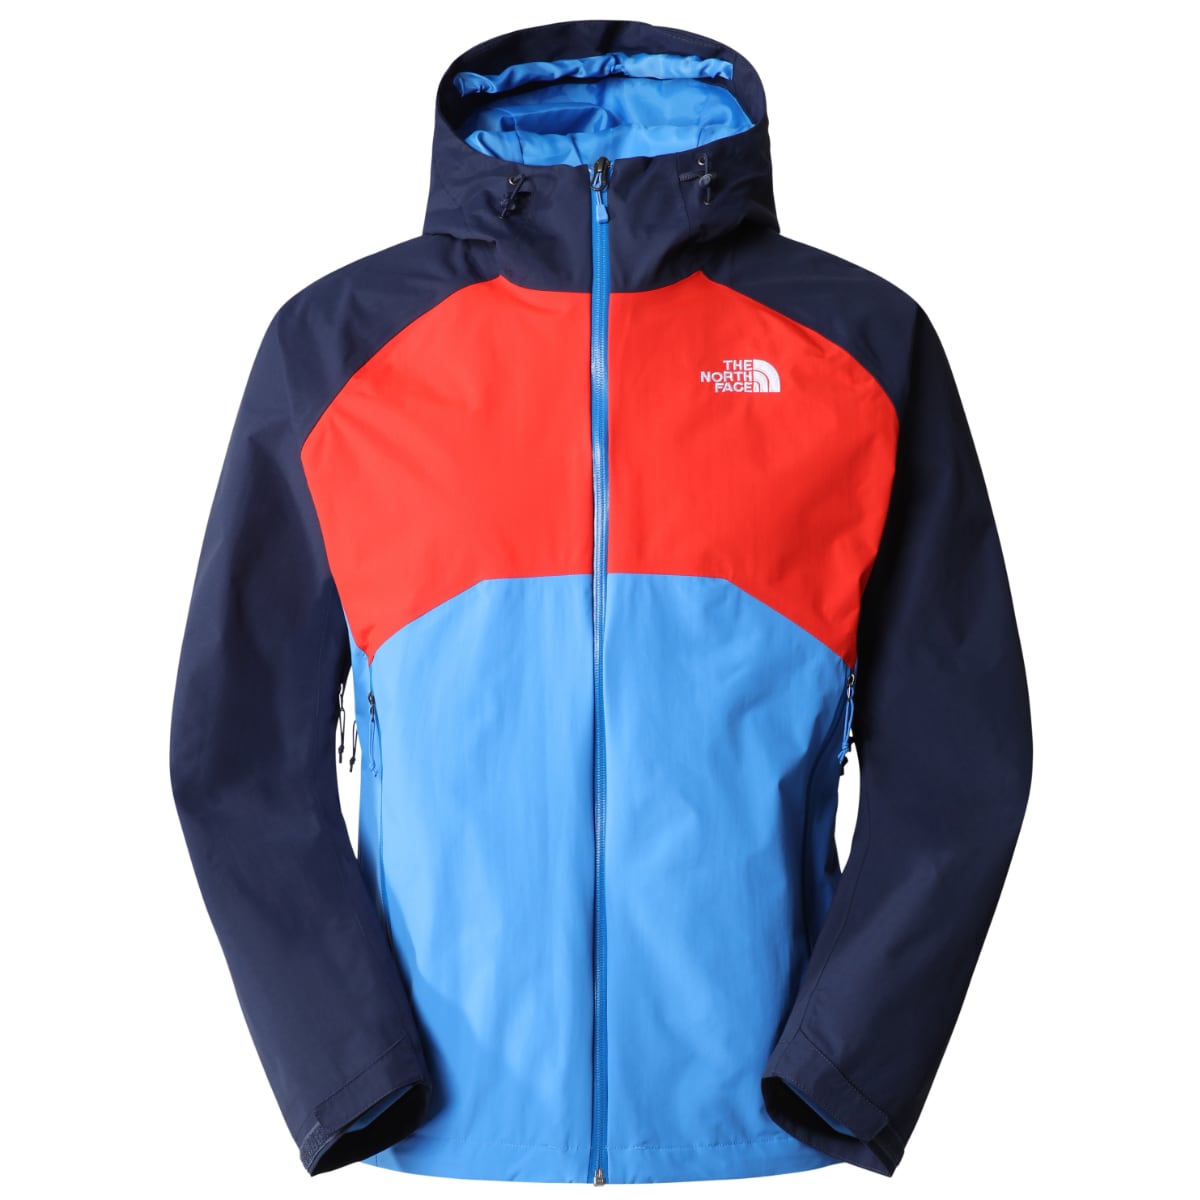 The North Face Stratos Waterproof Men's Jacket | Super Sonic Blue-Fiery Red-Summit Navy